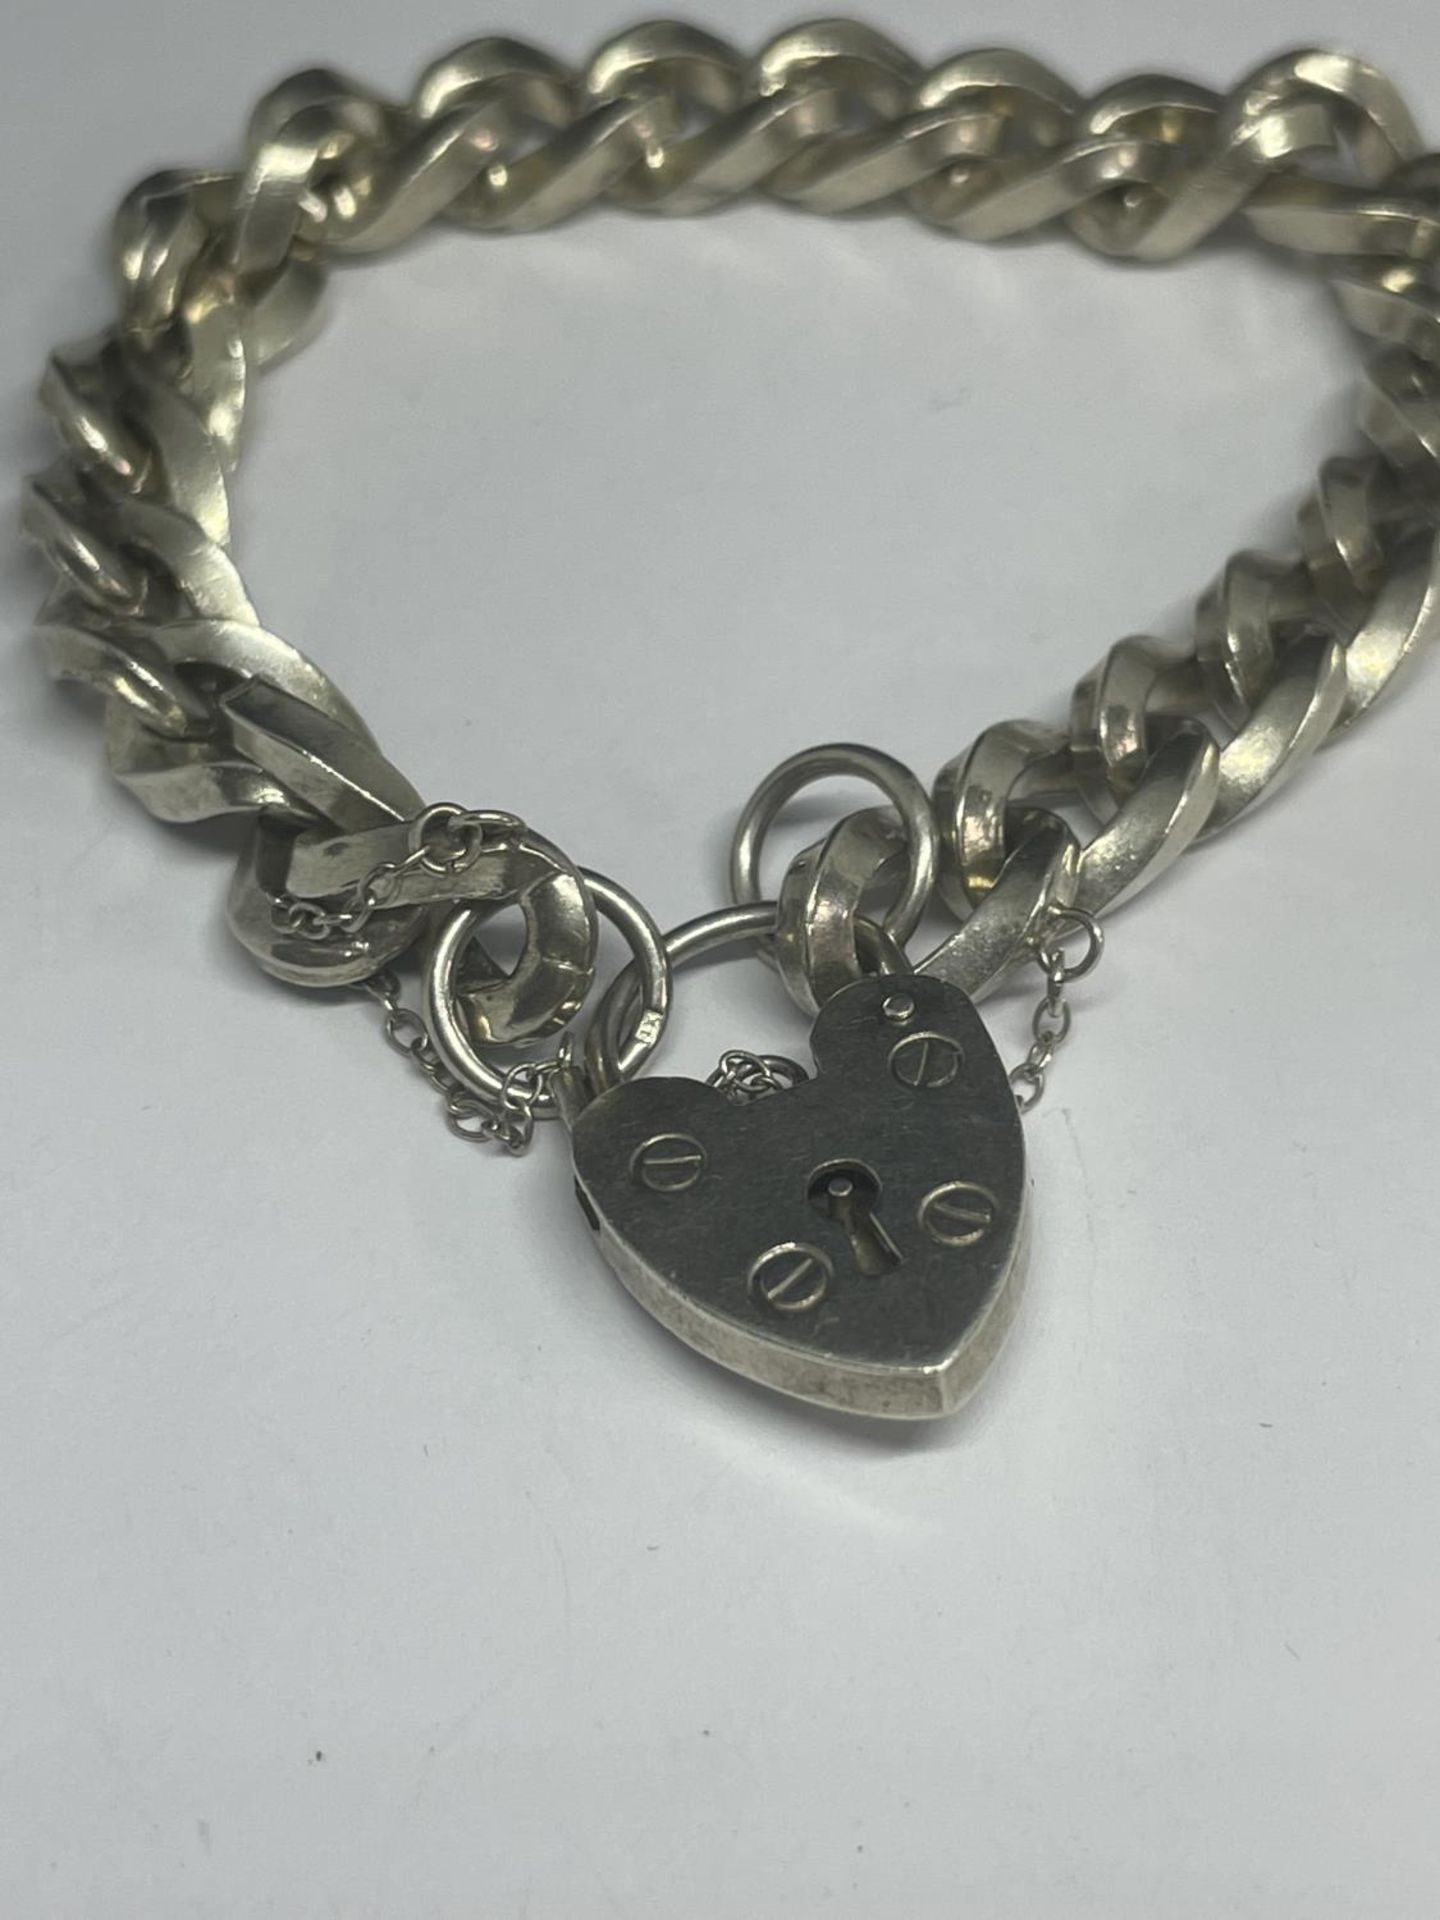 A HEAVY MARKED SILVER BRACELET WITH A HEART LOCK - Image 2 of 4